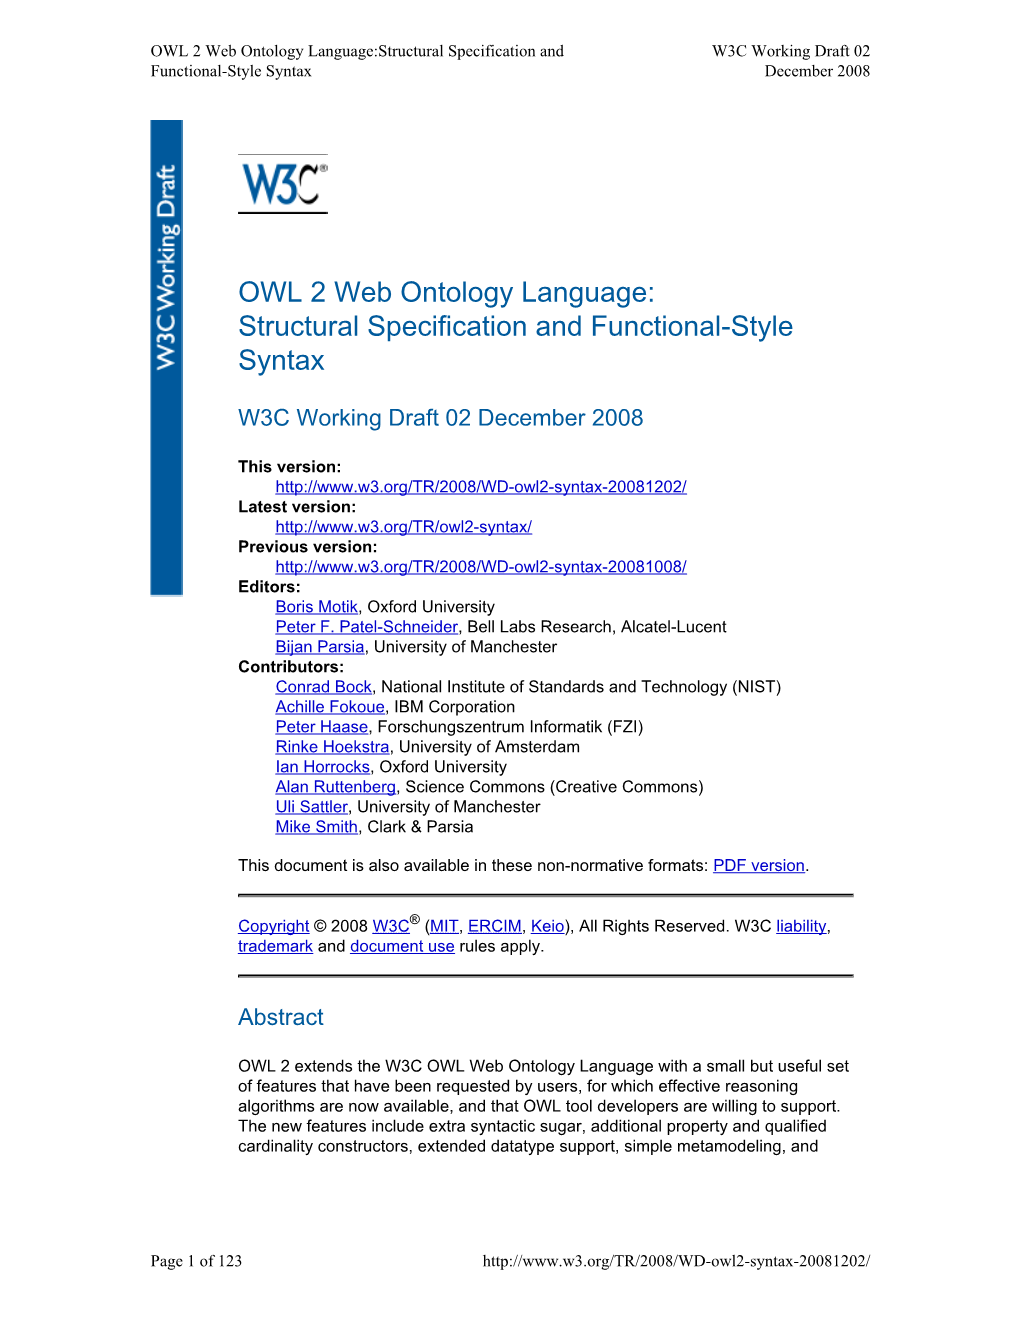 OWL 2 Web Ontology Language:Structural Specification and W3C Working Draft 02 Functional-Style Syntax December 2008